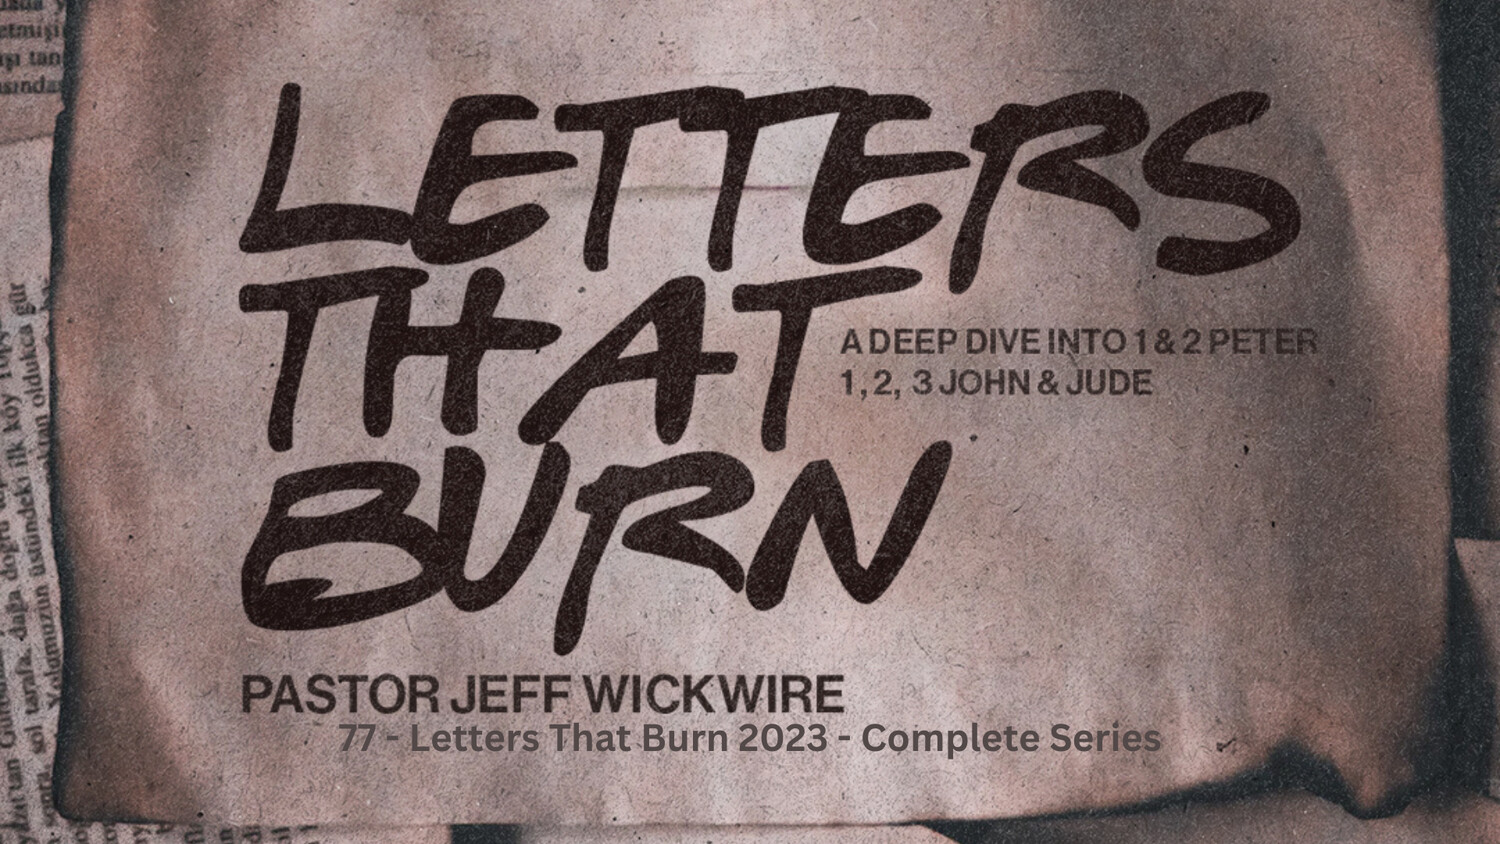 77 - Letters That Burn  2023 Complete Series  By Pastor Jeff Wickwire